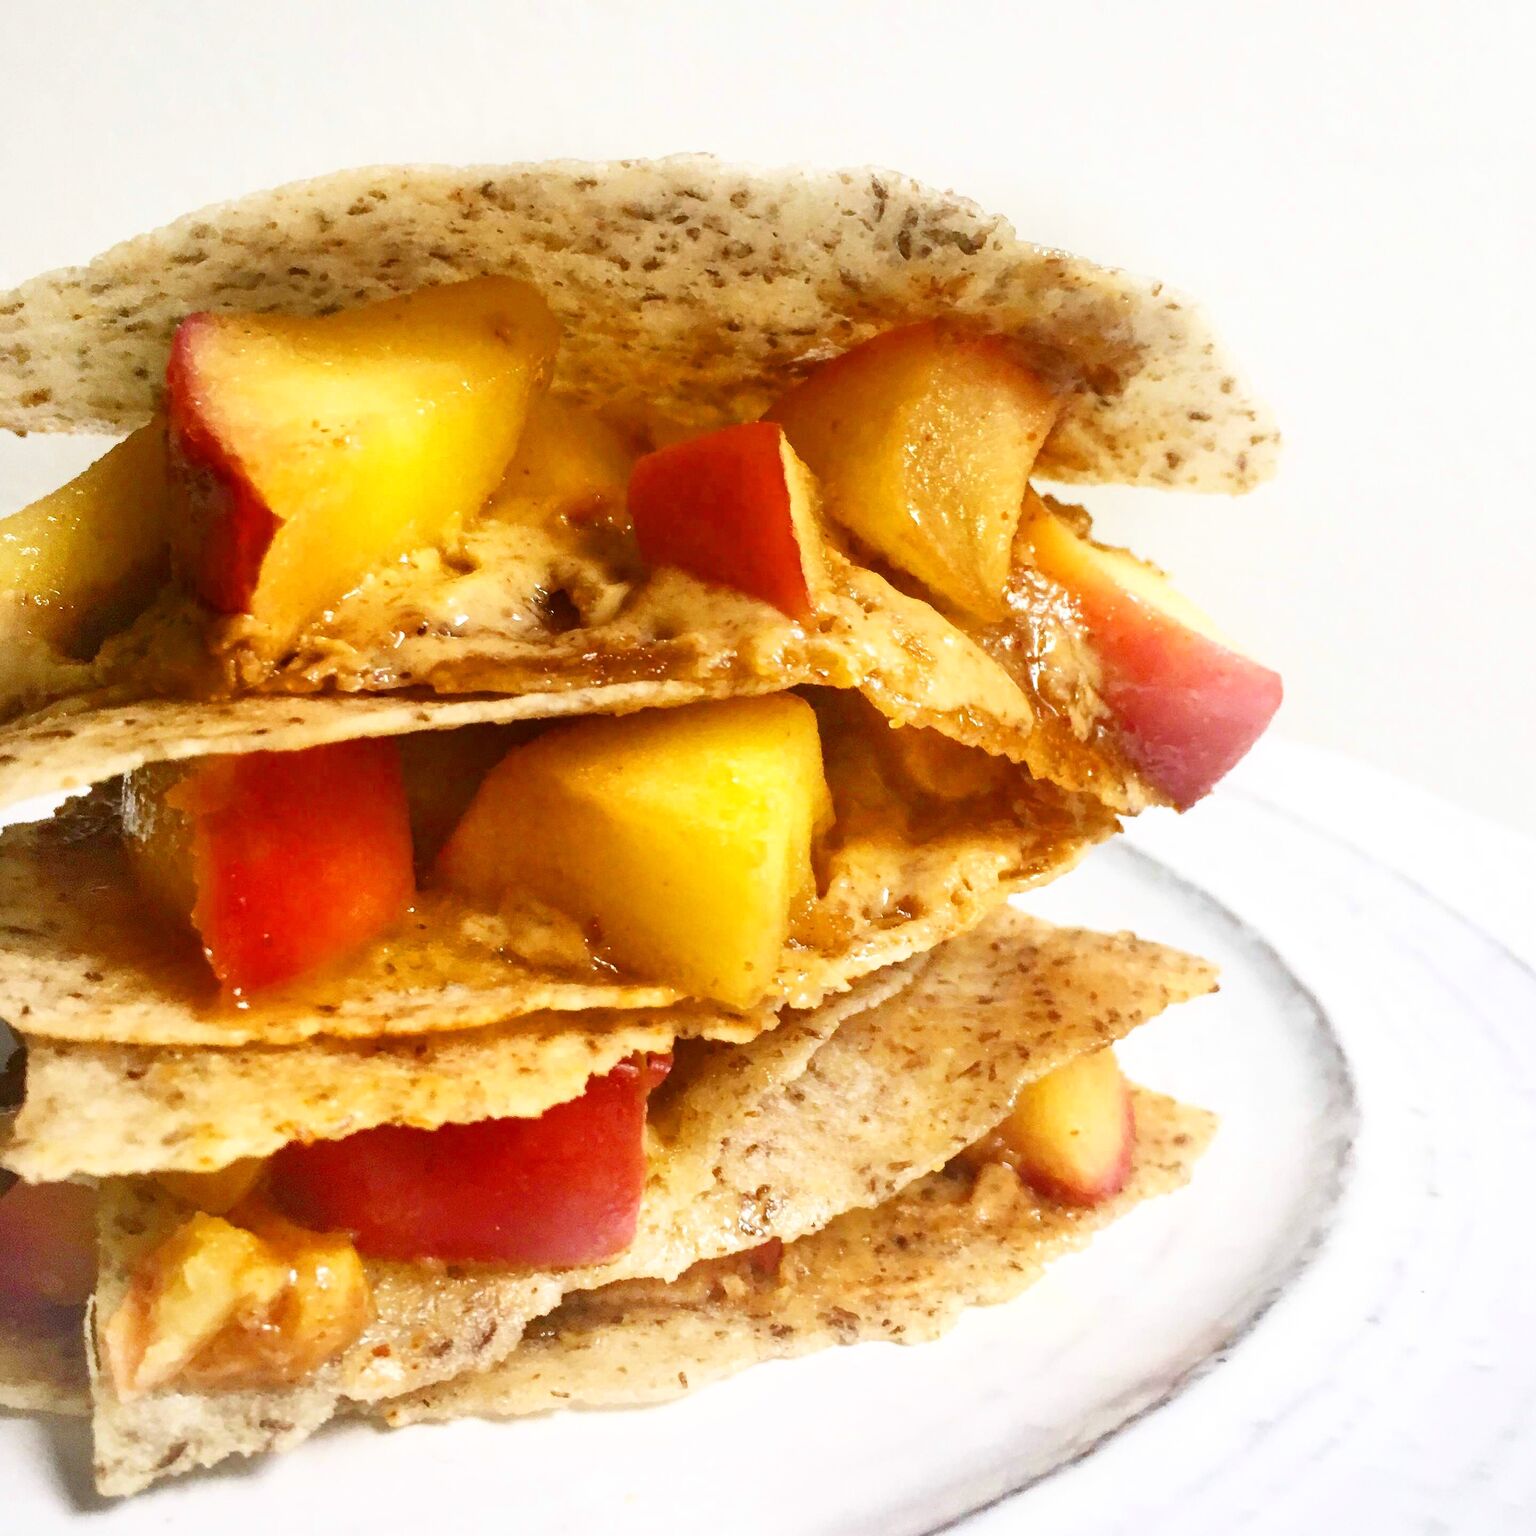 Spiced Apple Peanut Butter Quesadilla Made with Smoothie Mix